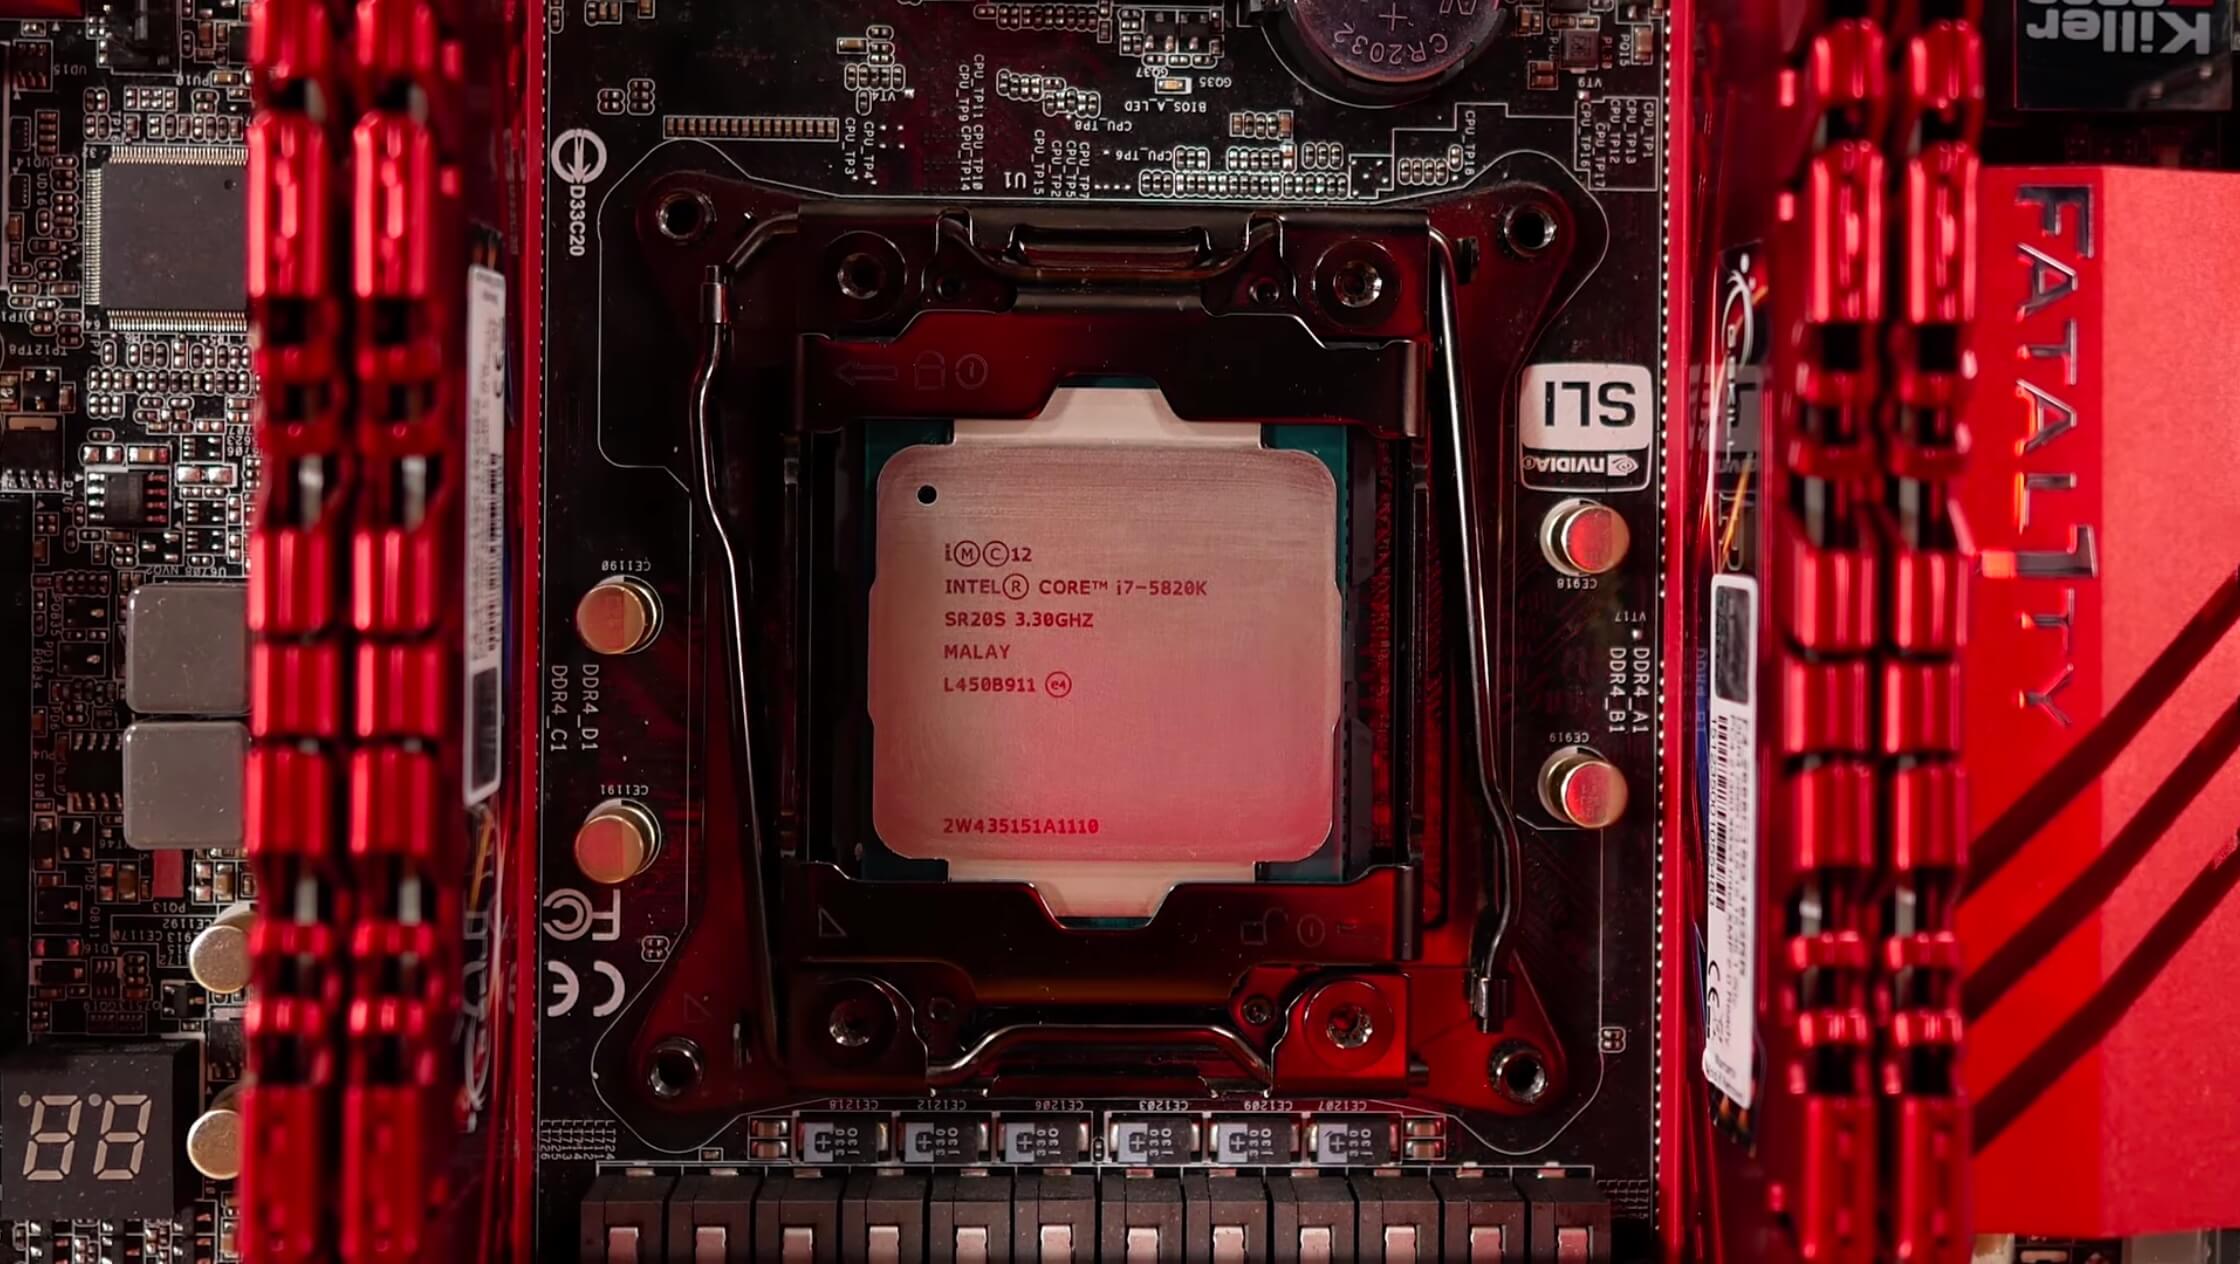 6-core/12-thread Core i7 for $200, i7-5820K Revisited > Need or 